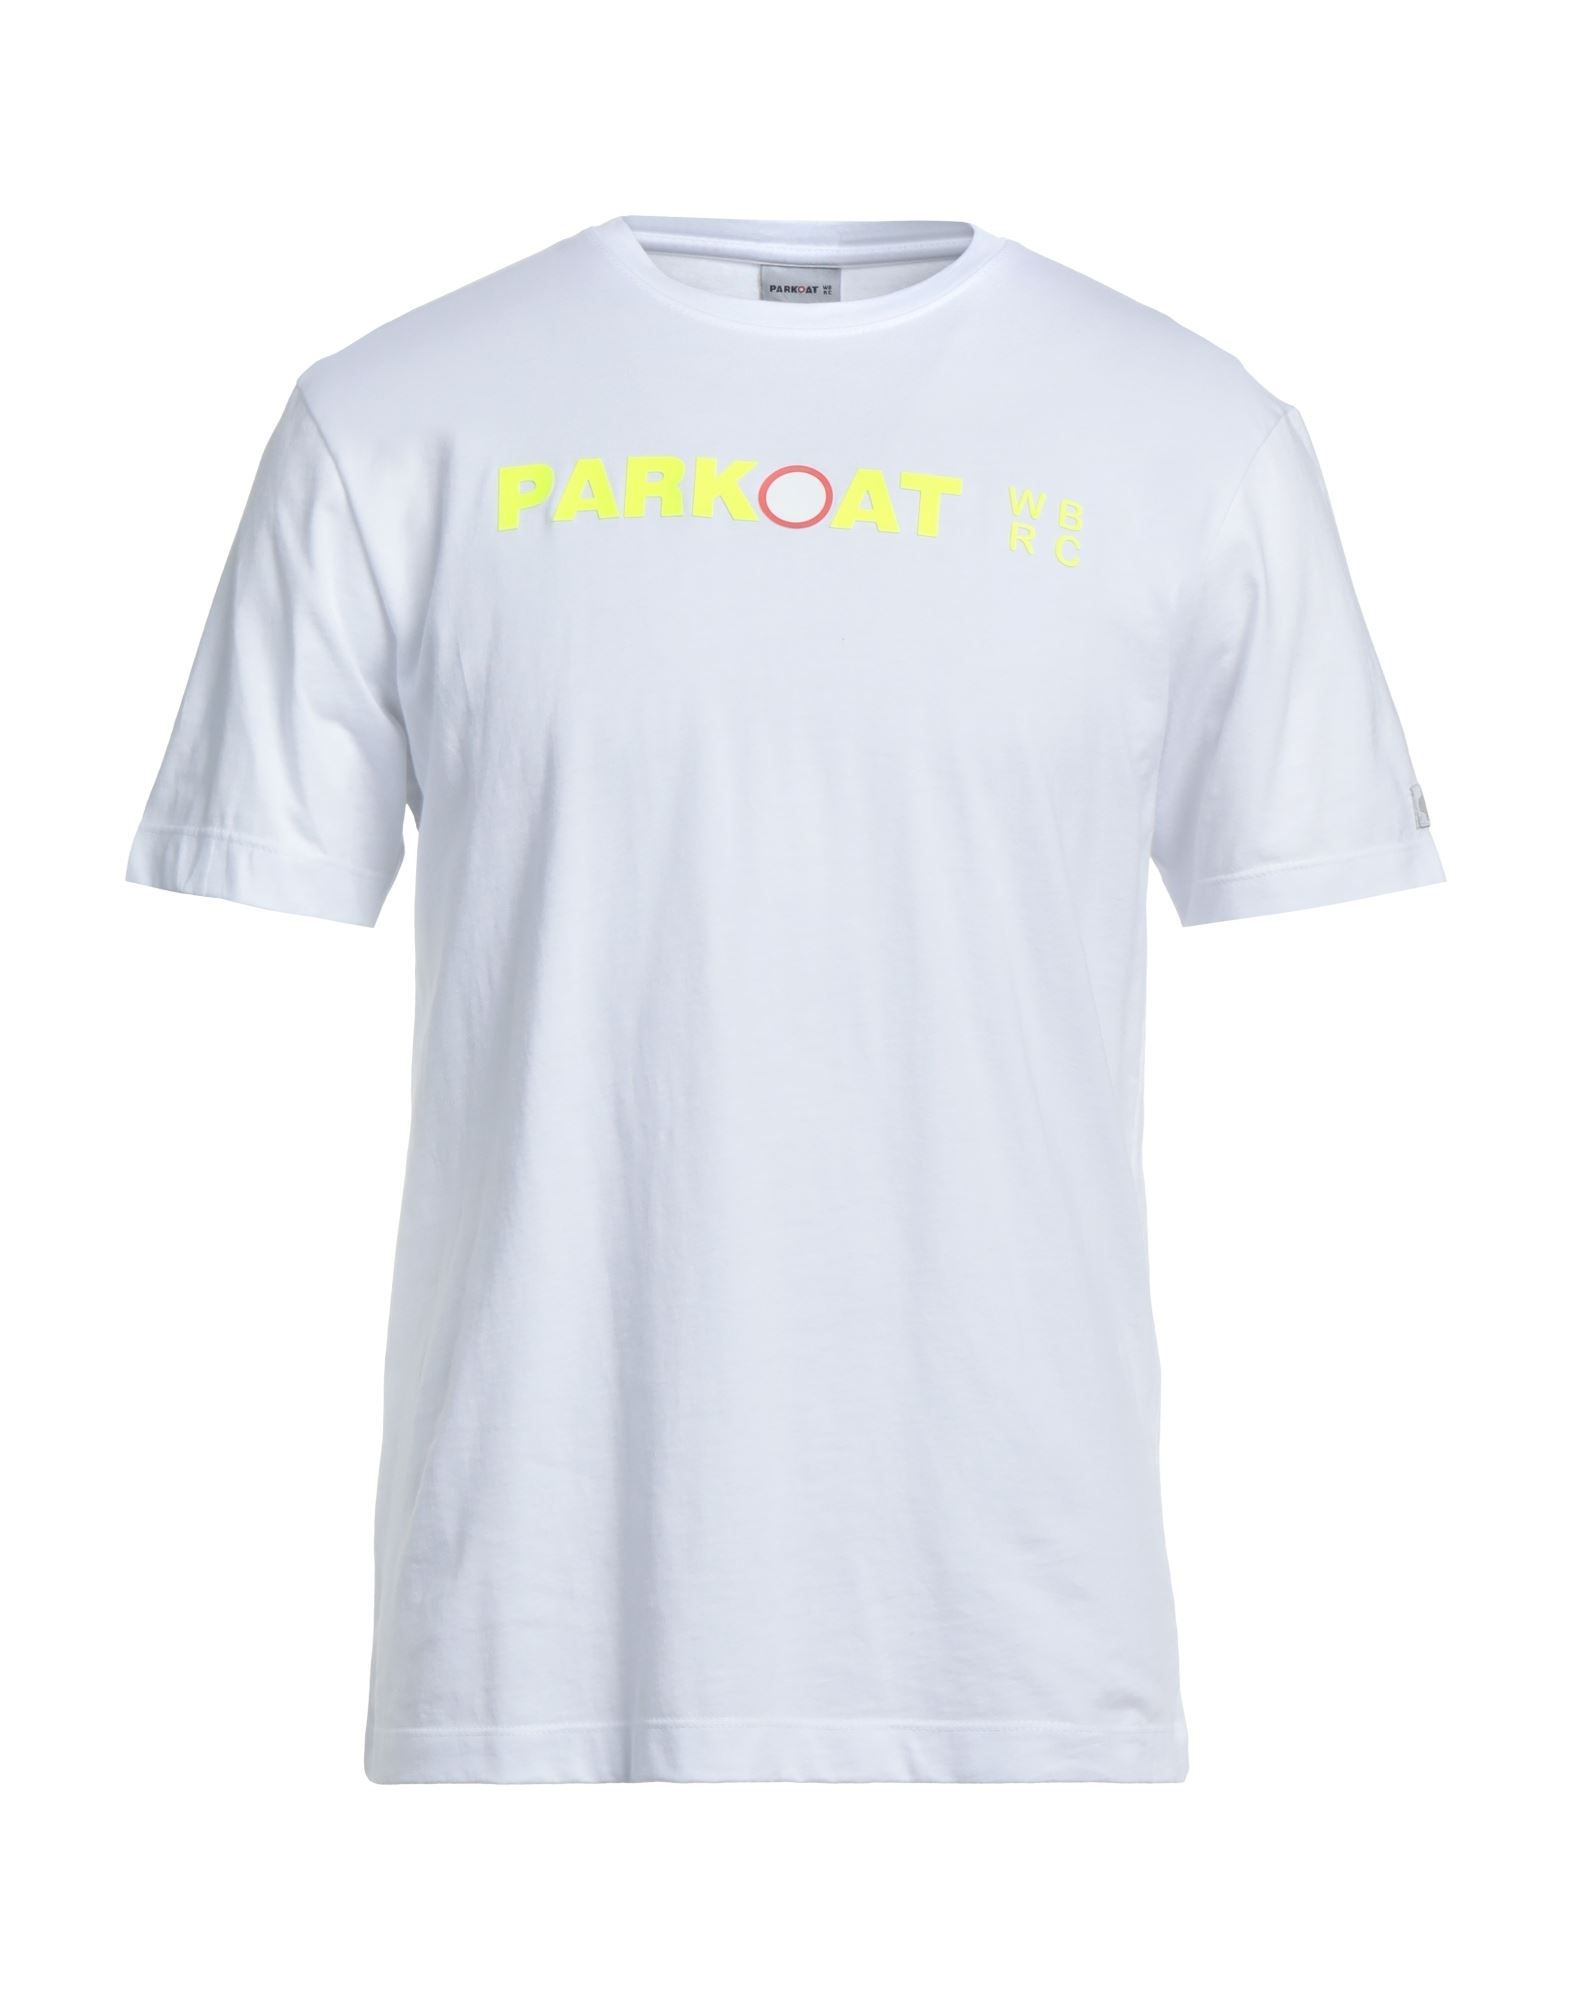 Parkoat T-shirts In White